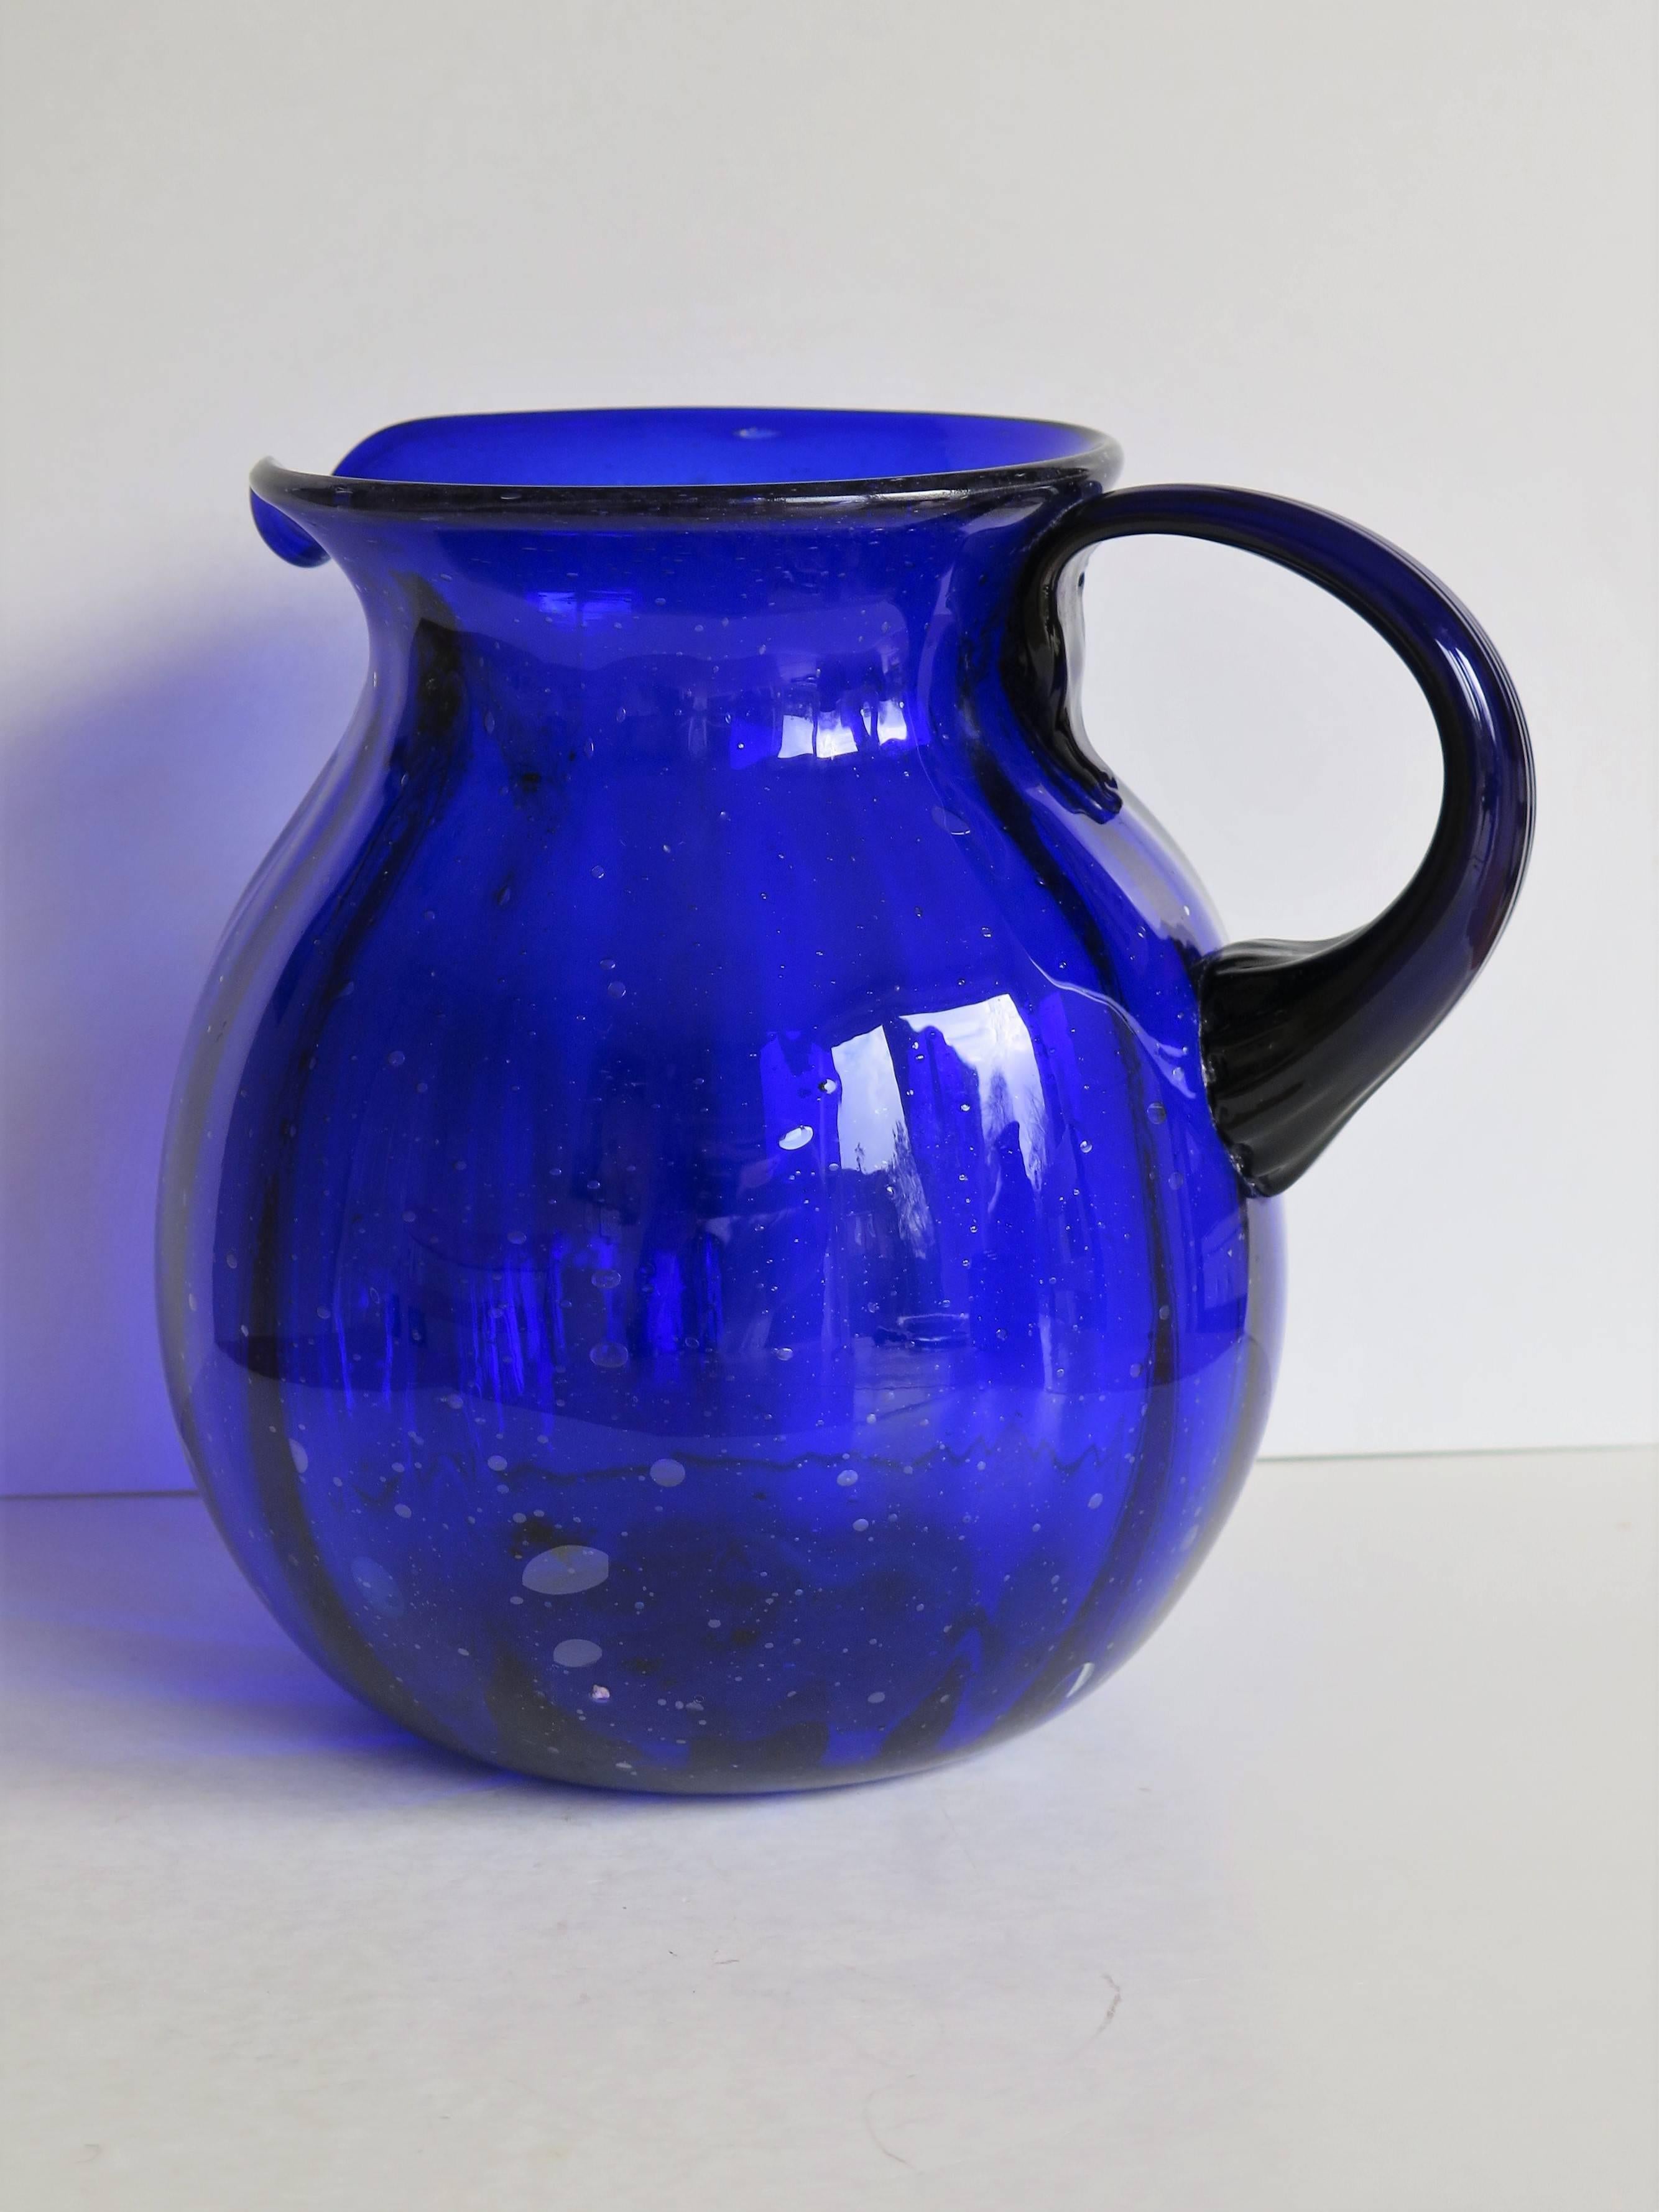 This is a very good hand blown large Jug or Pitcher in cobalt blue glass which we date to the earlier part of the 20th century, circa 1920s. 

This pitcher has a vertically fluted baluster shape with a good open top and pouring spout, with a loop